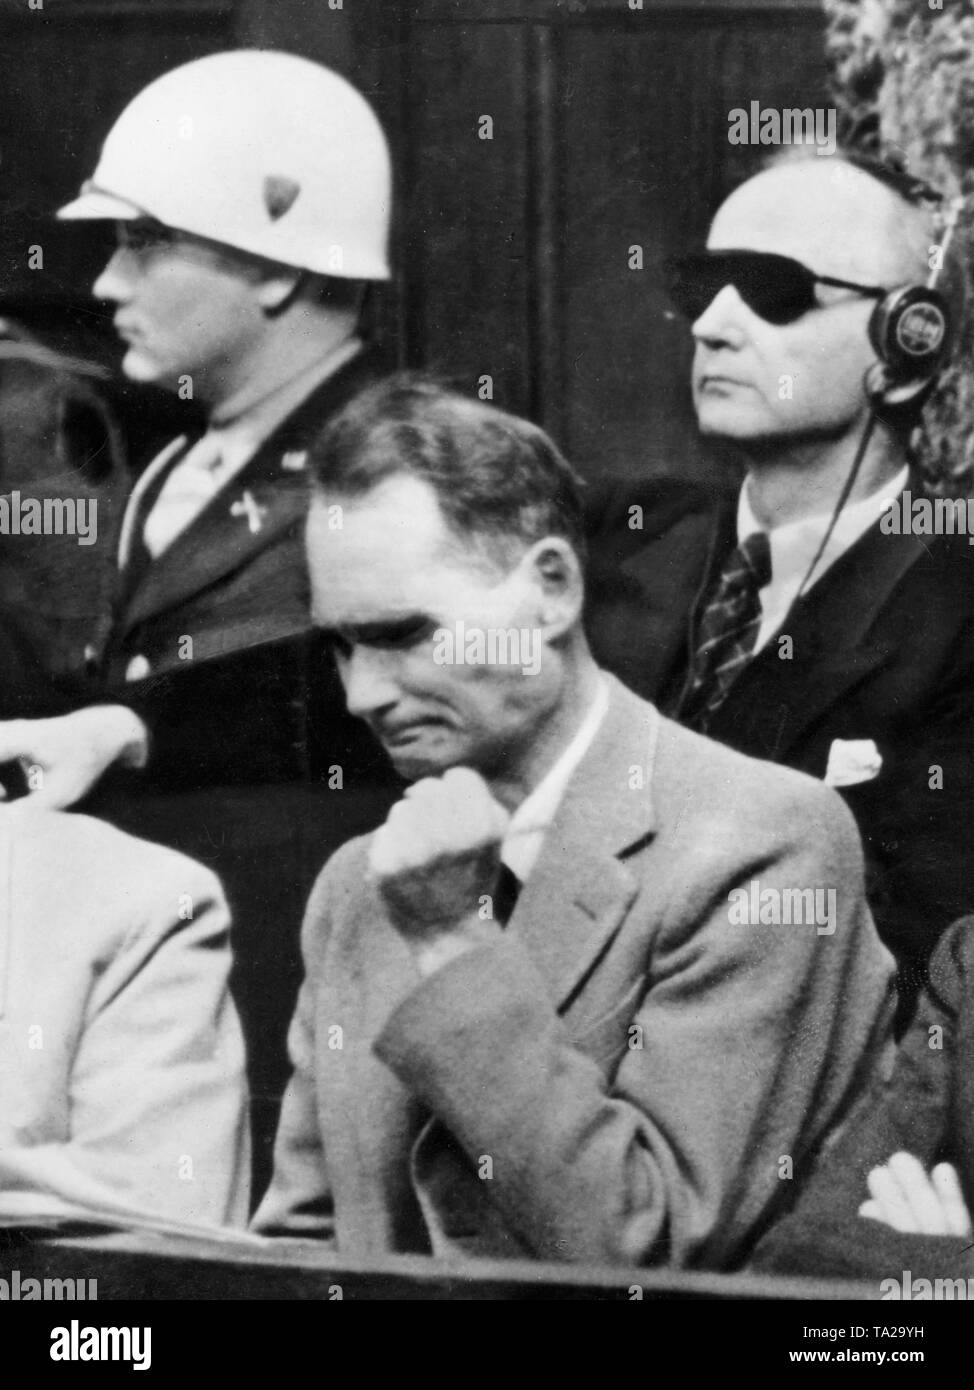 Rudolf Hess clenches his fist during the trial of the major war criminals in Nuremberg Palace of Justice, 1945 Stock Photo